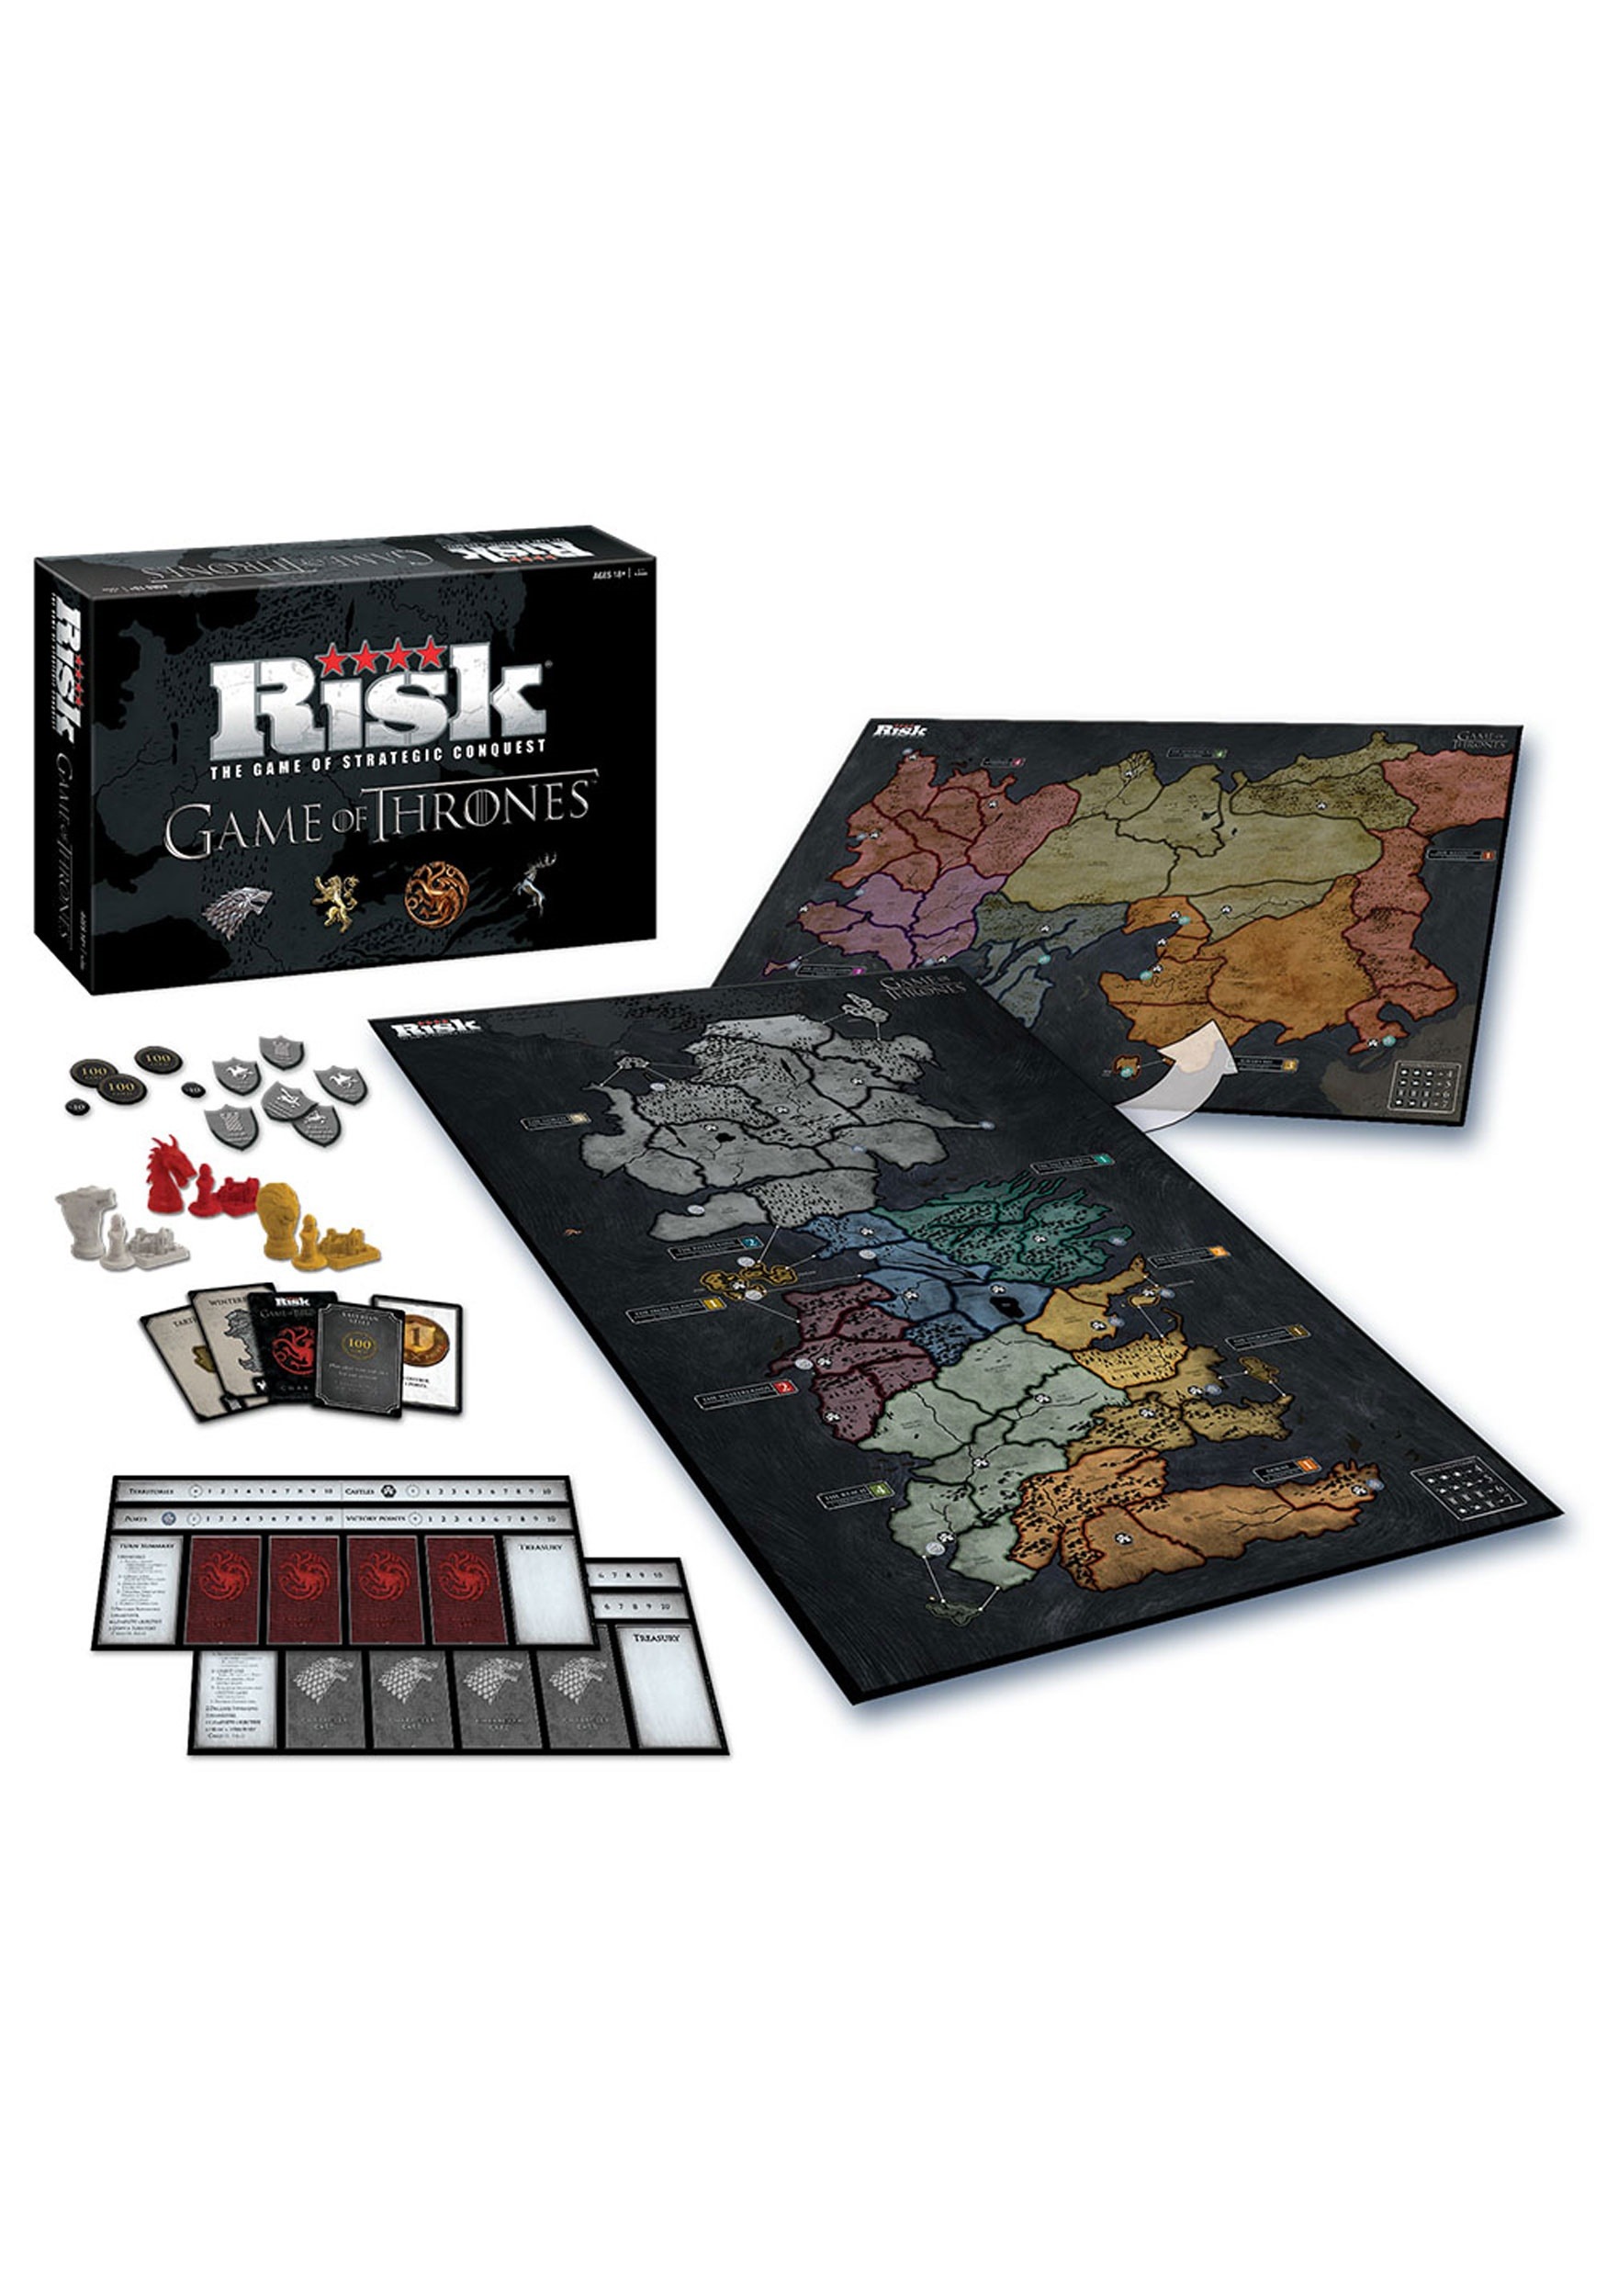 Game of Thrones Edition - RISK